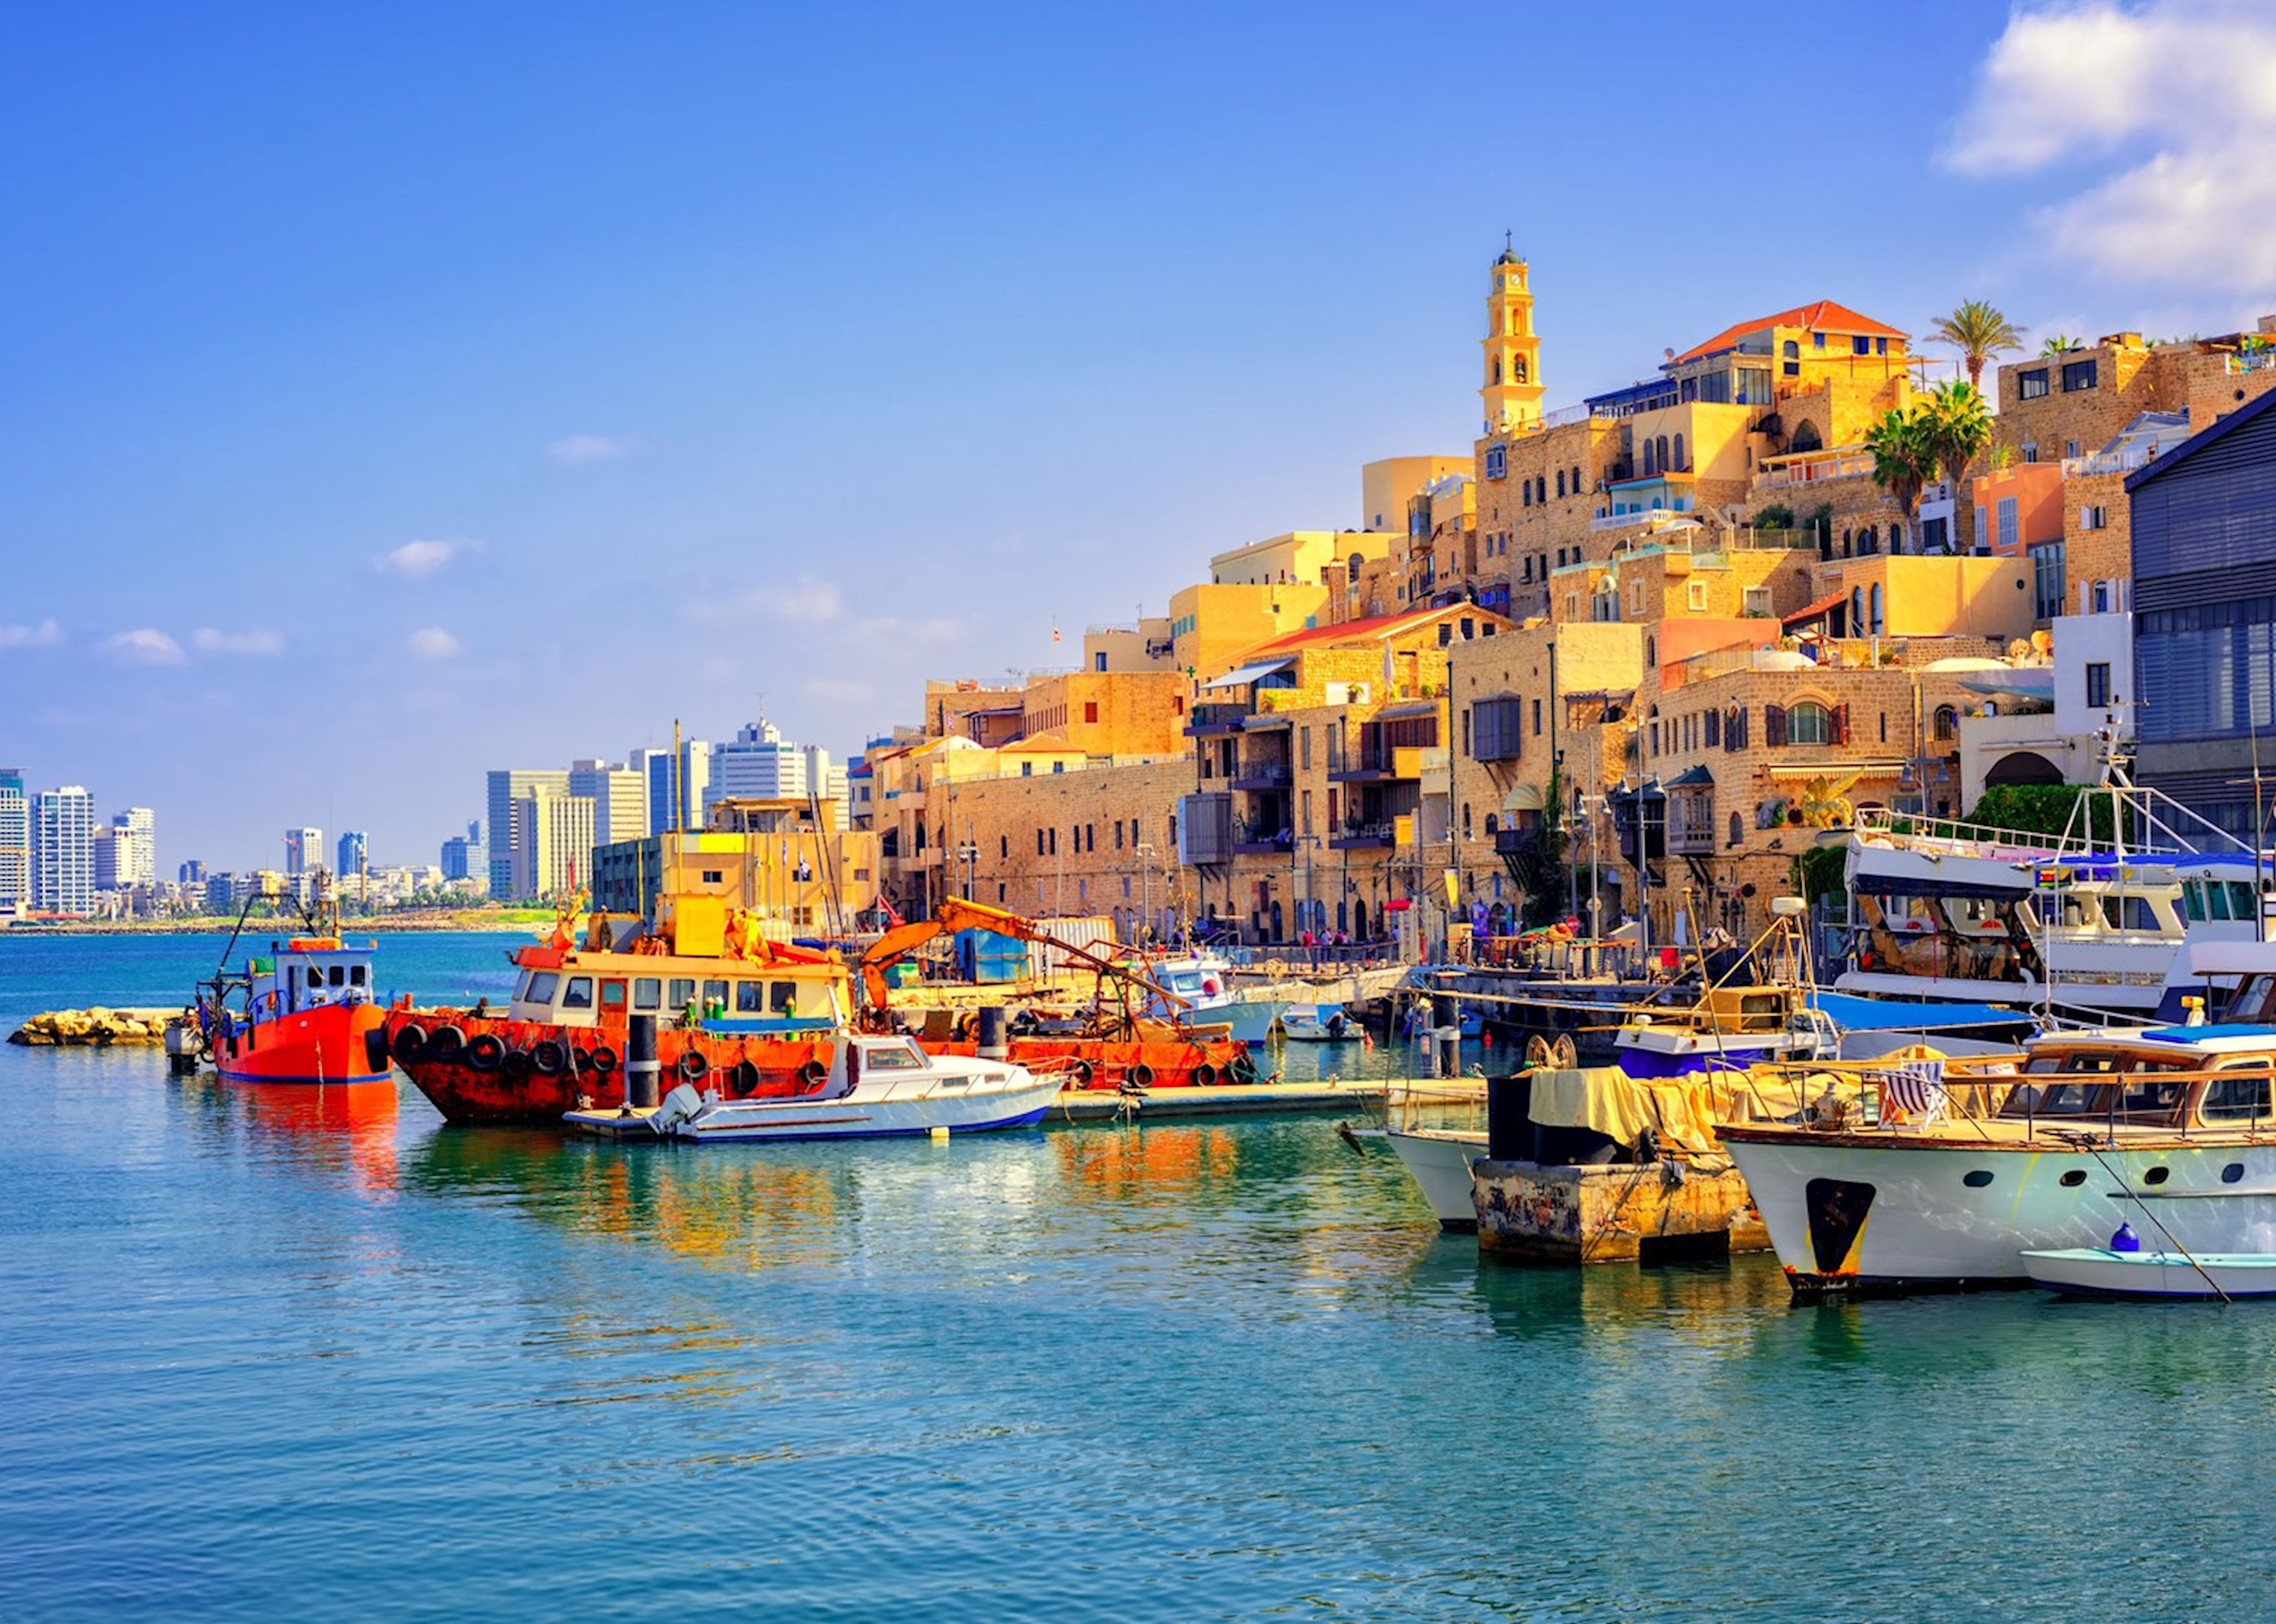 israel holiday tours